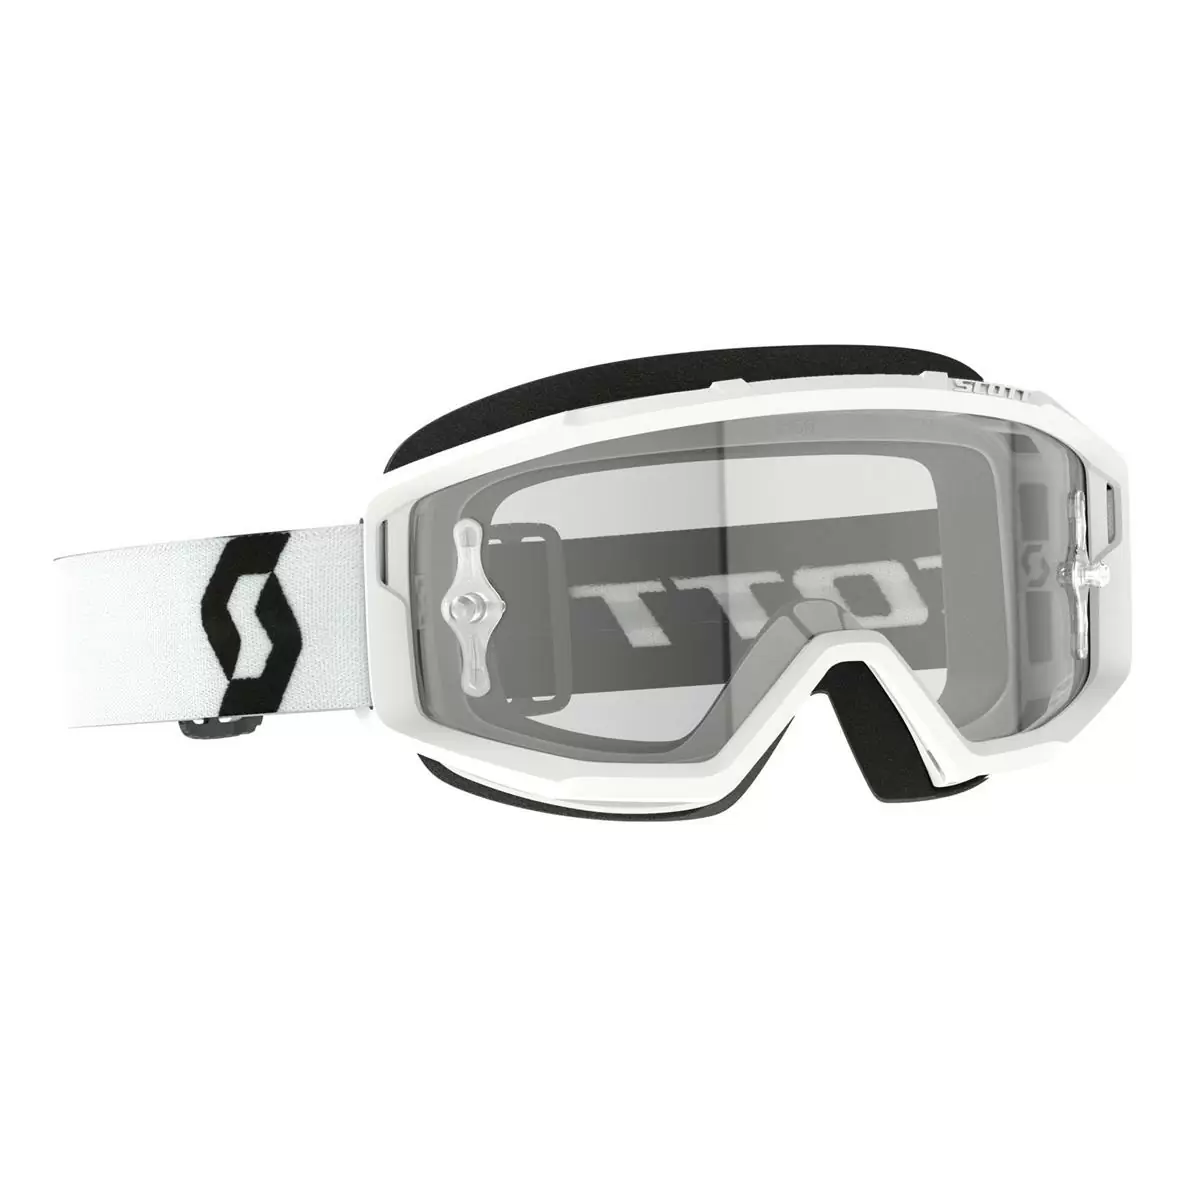 Primal Clear Goggle White Transparent Lens - image